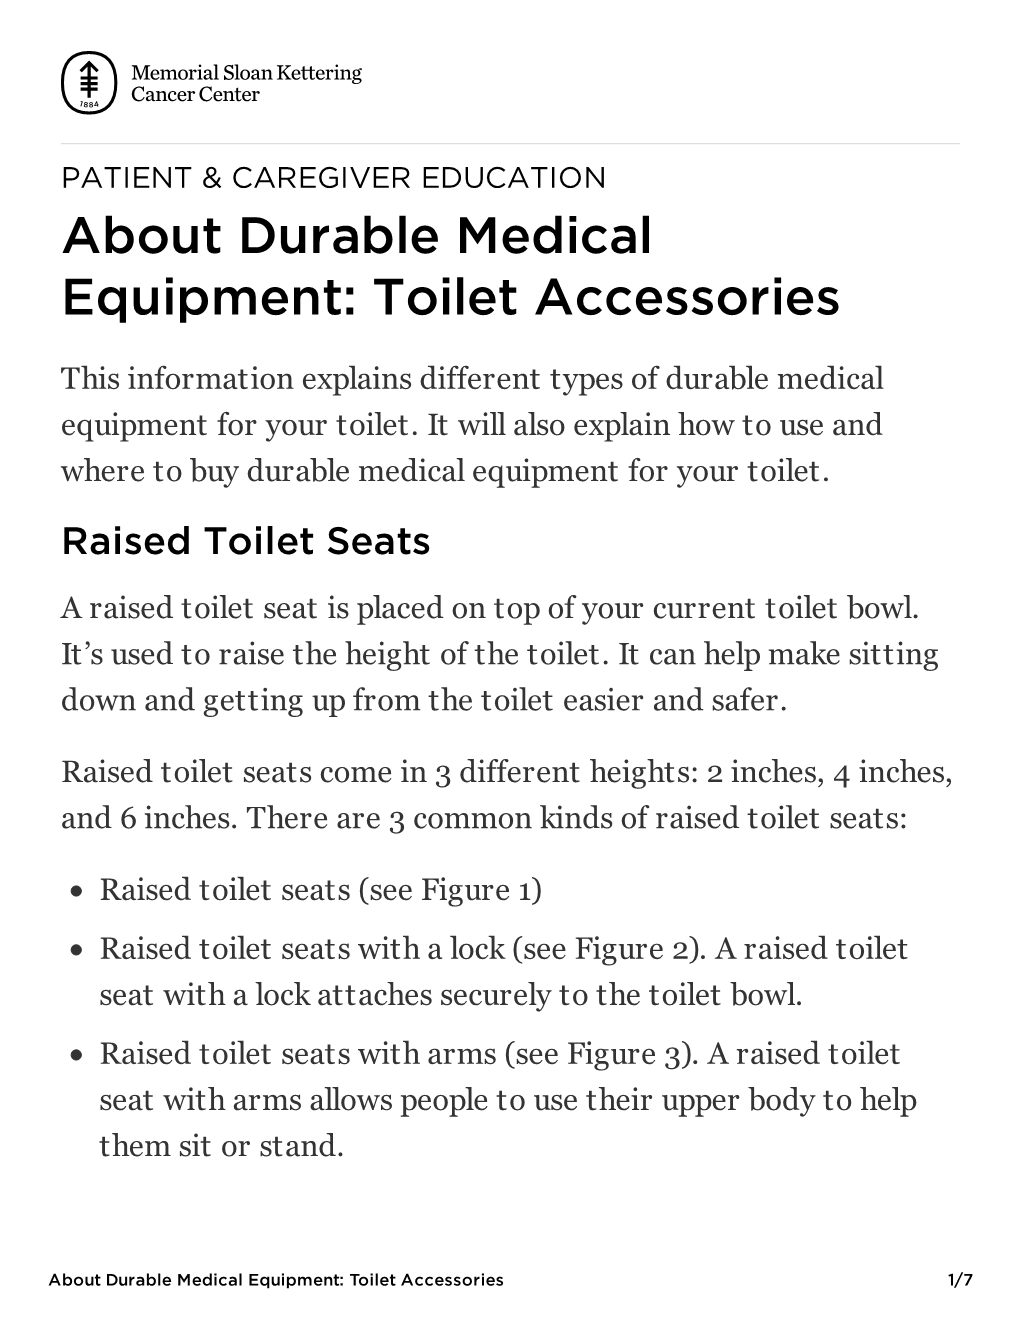 About Durable Medical Equipment: Toilet Accessories